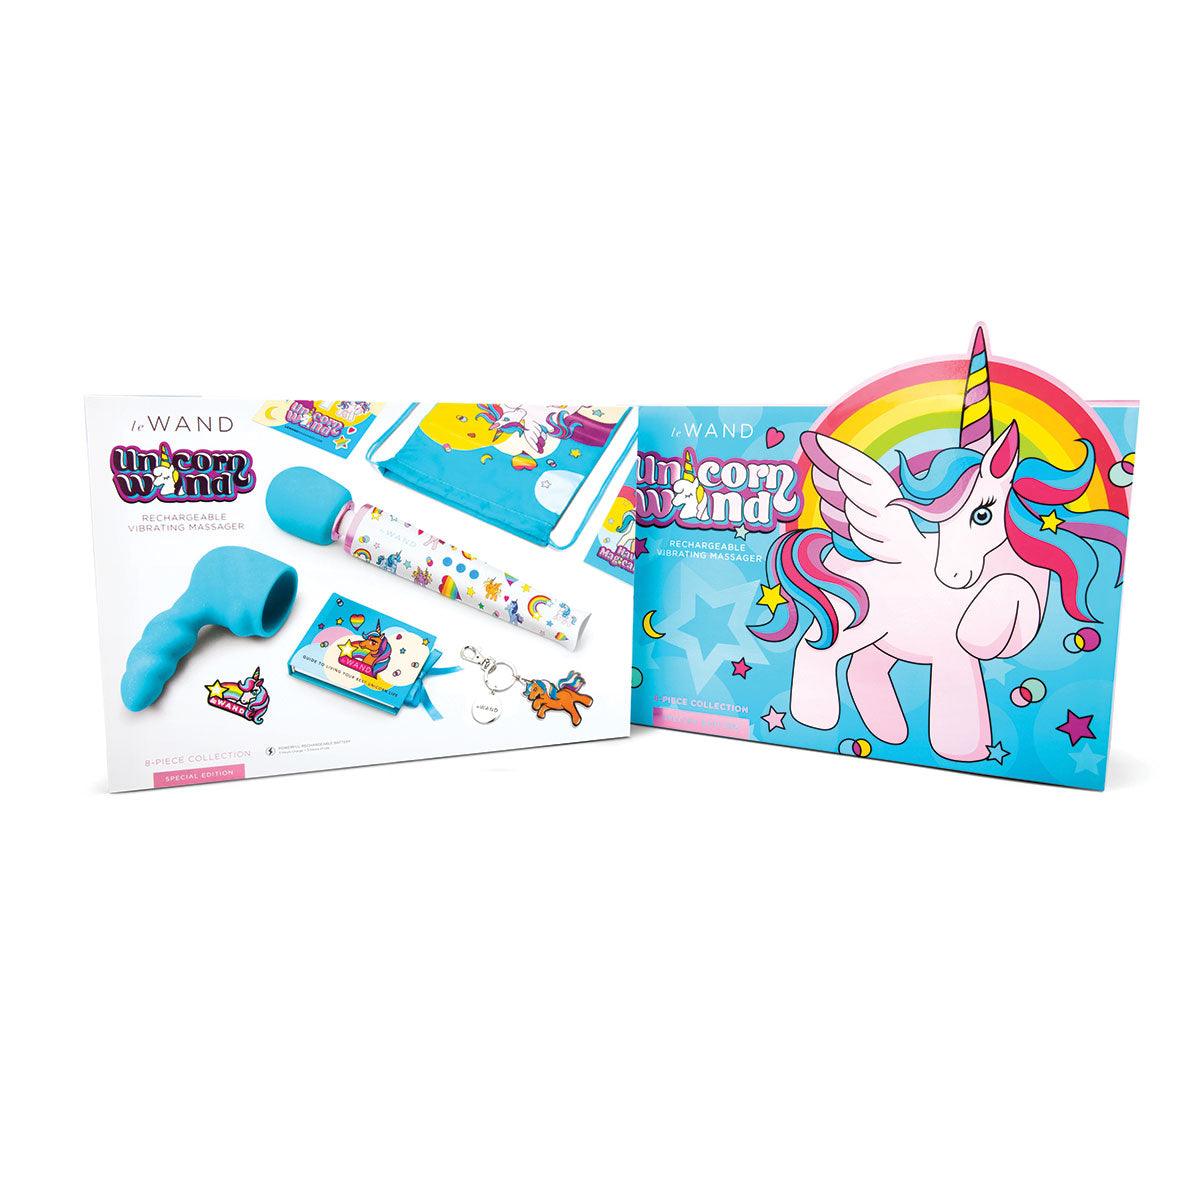 Le Wand Unicorn Wand 8pc Collection - shop enby